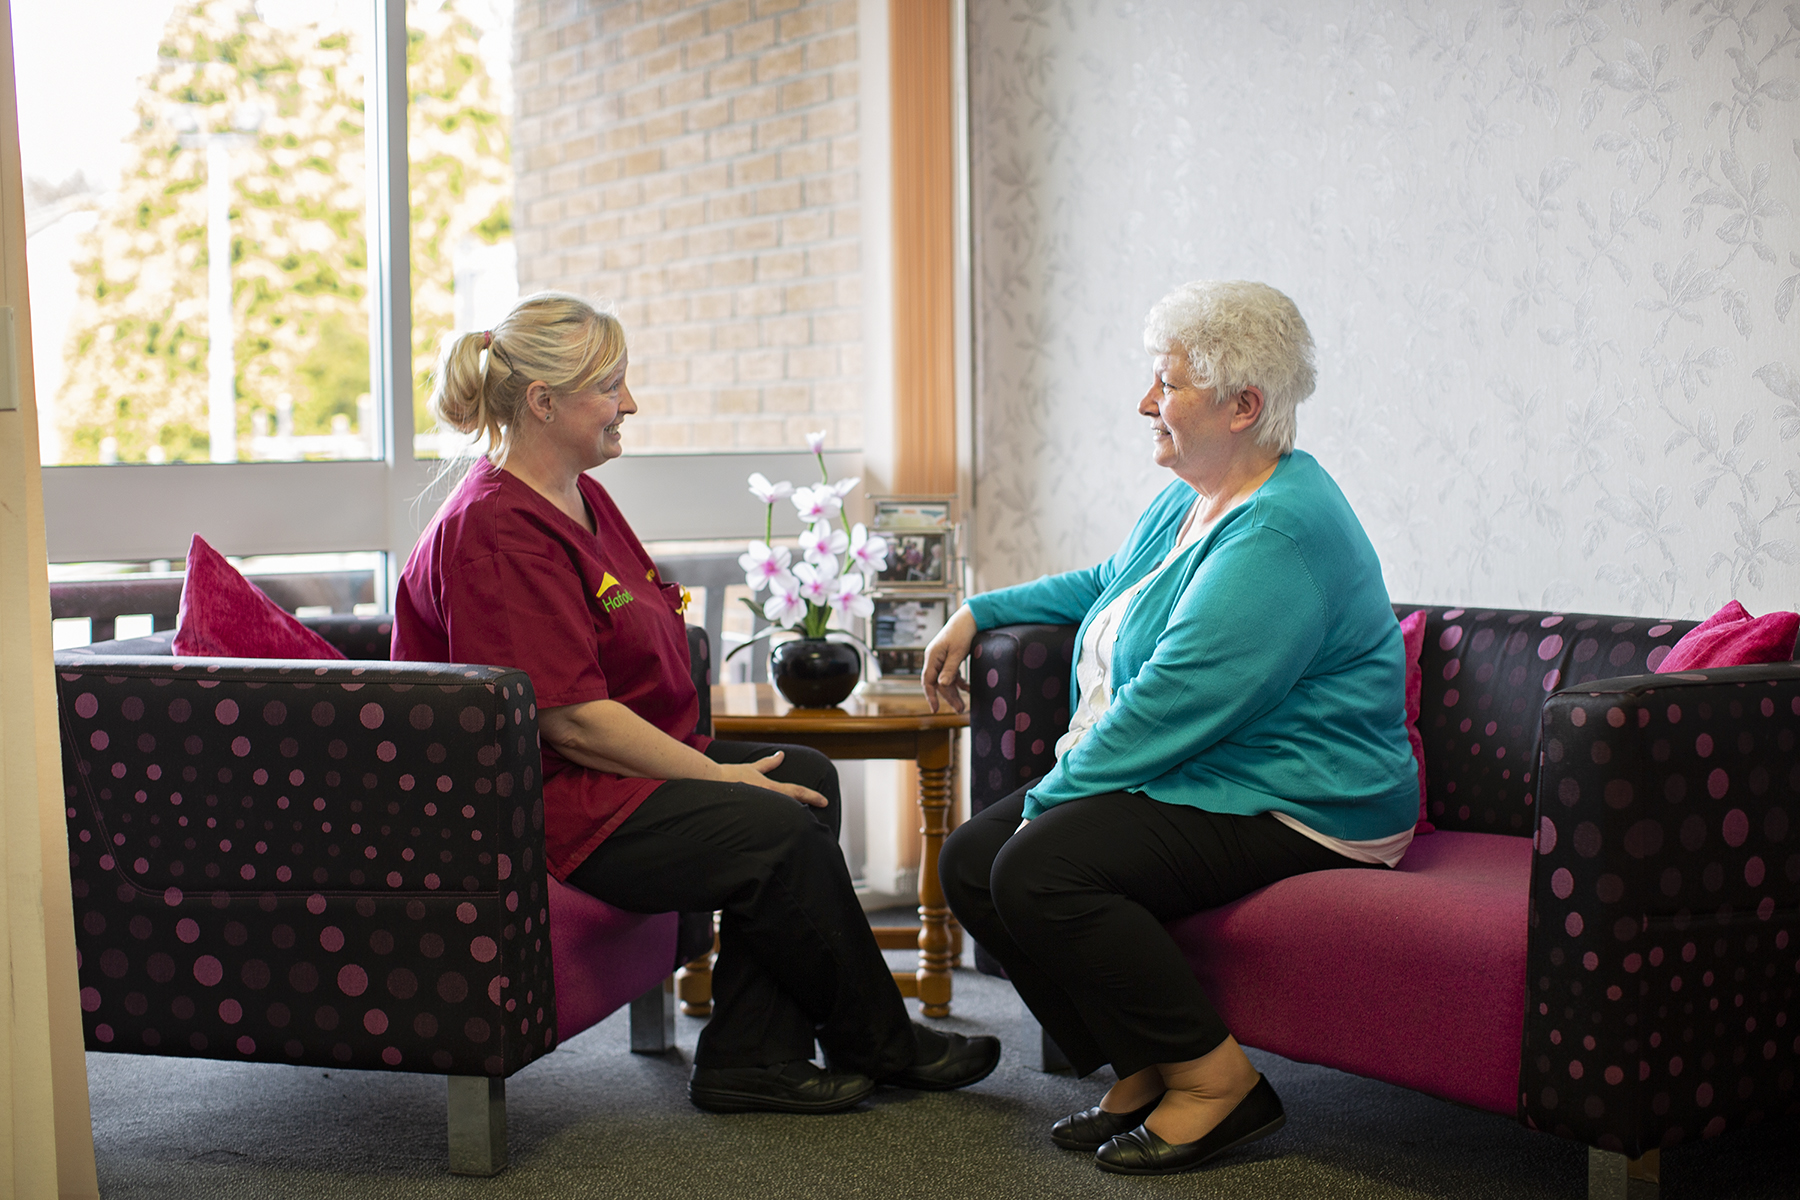 Colleagues at Arthur Jenkins care home chatting while sitting on chairs